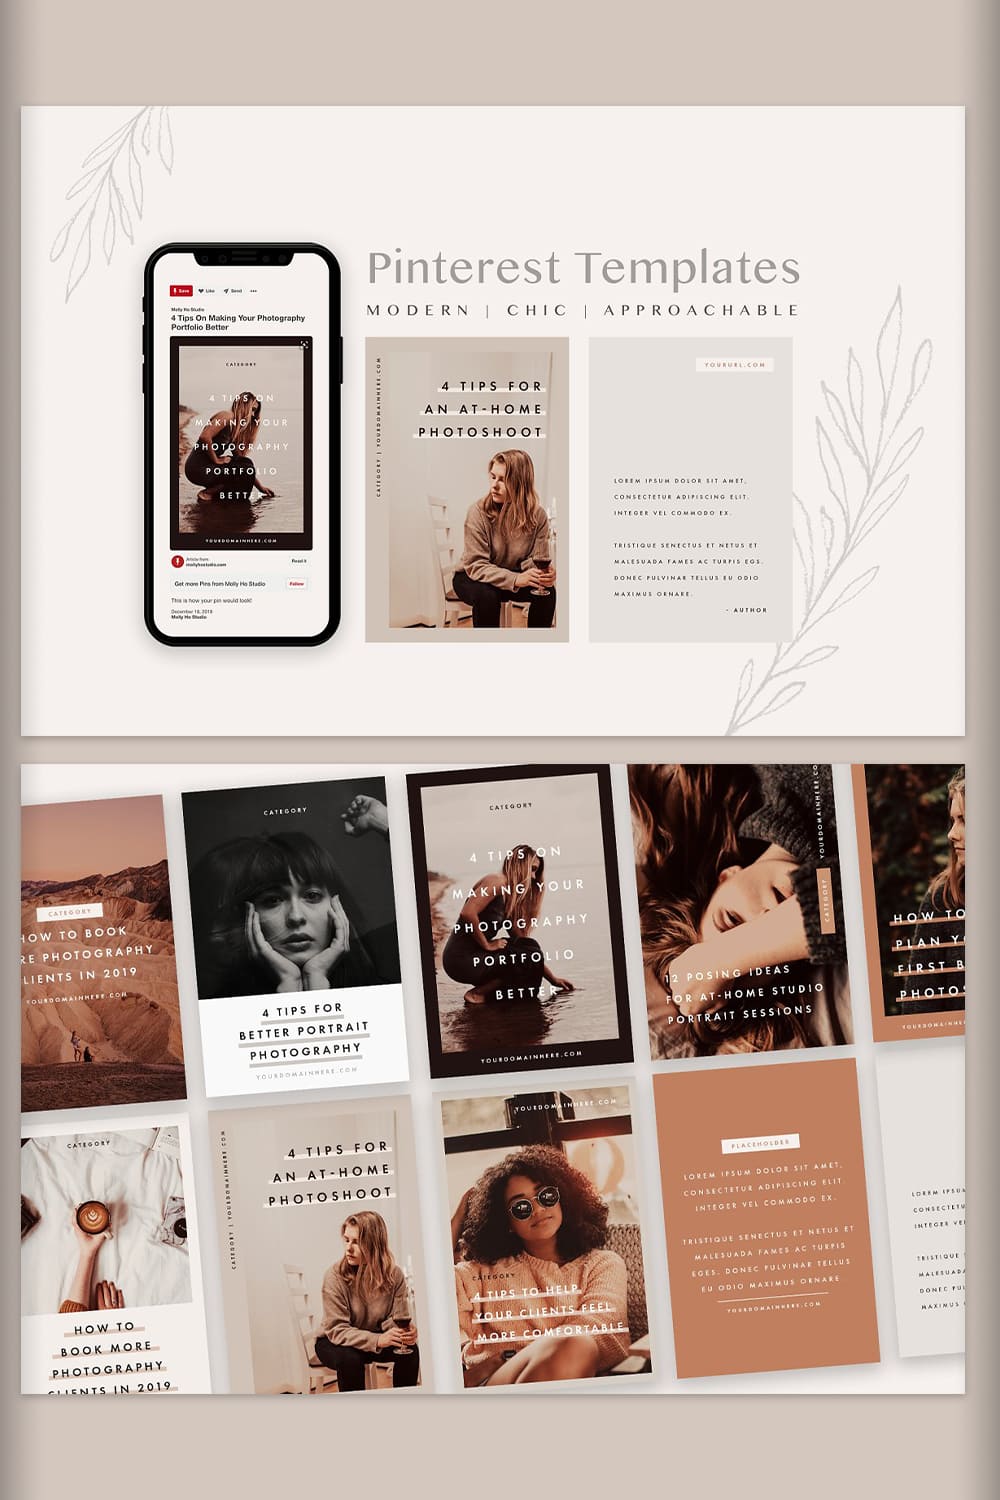 Pinterest Templates - "4 Tips For An At - Home Photoshoot".